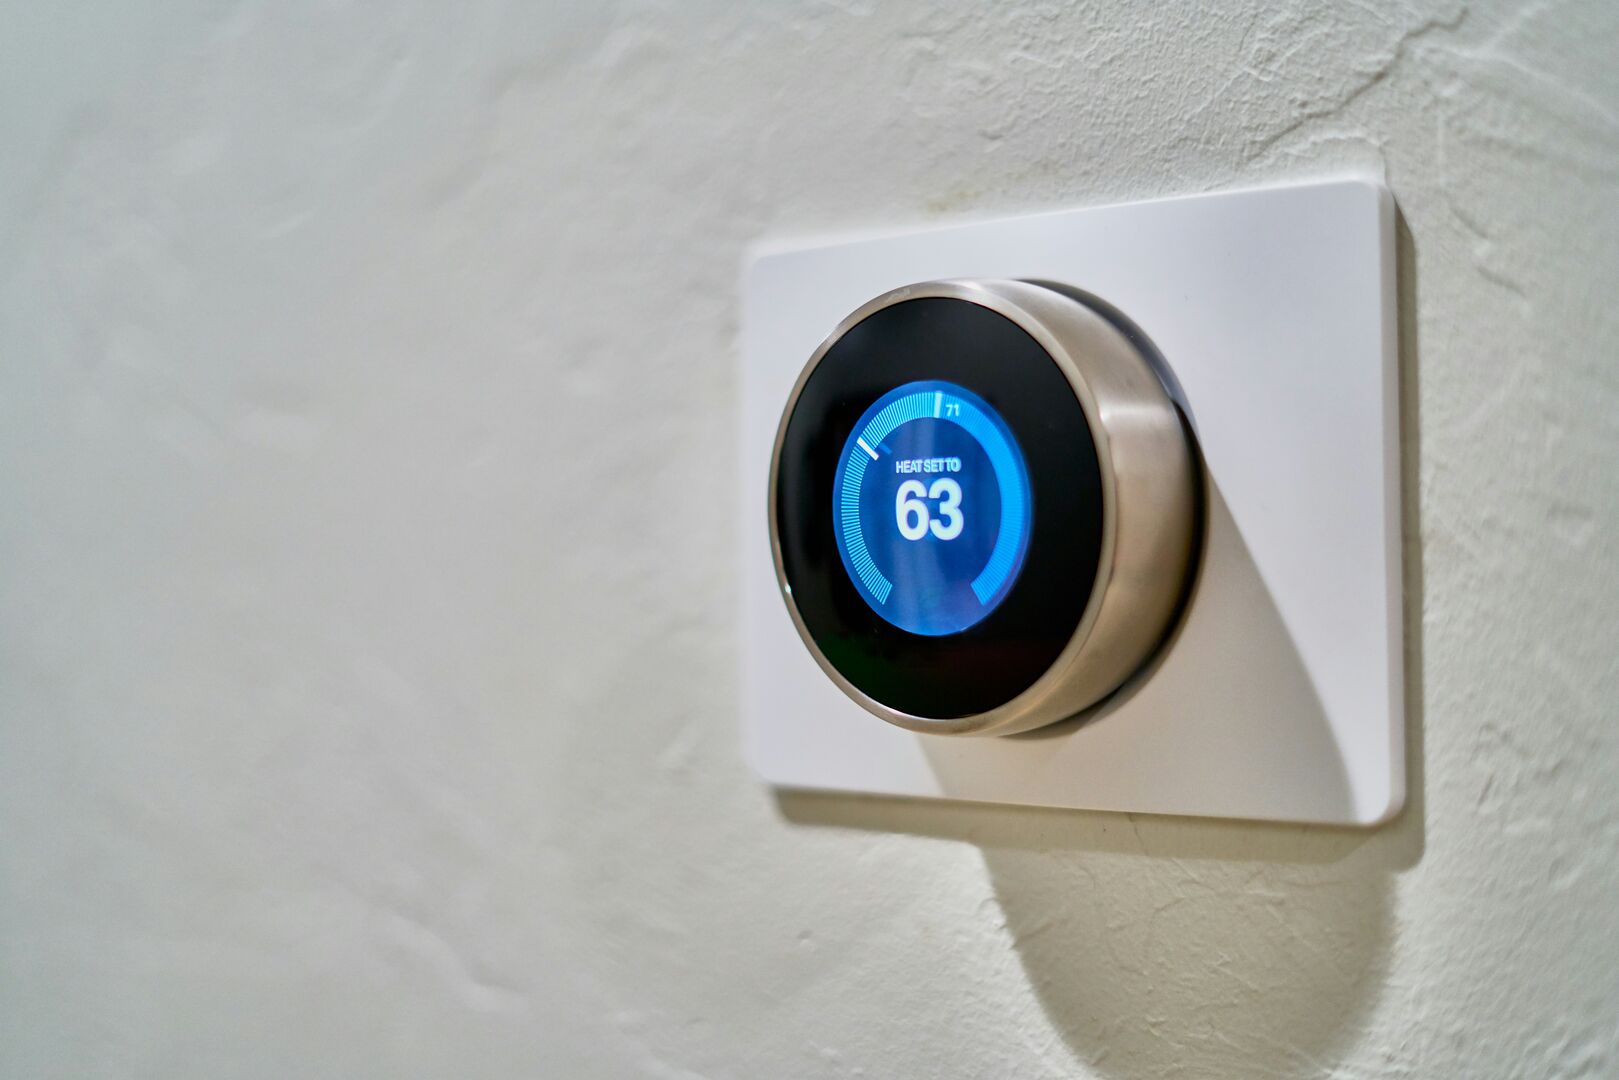 Nest thermostat in home renovation